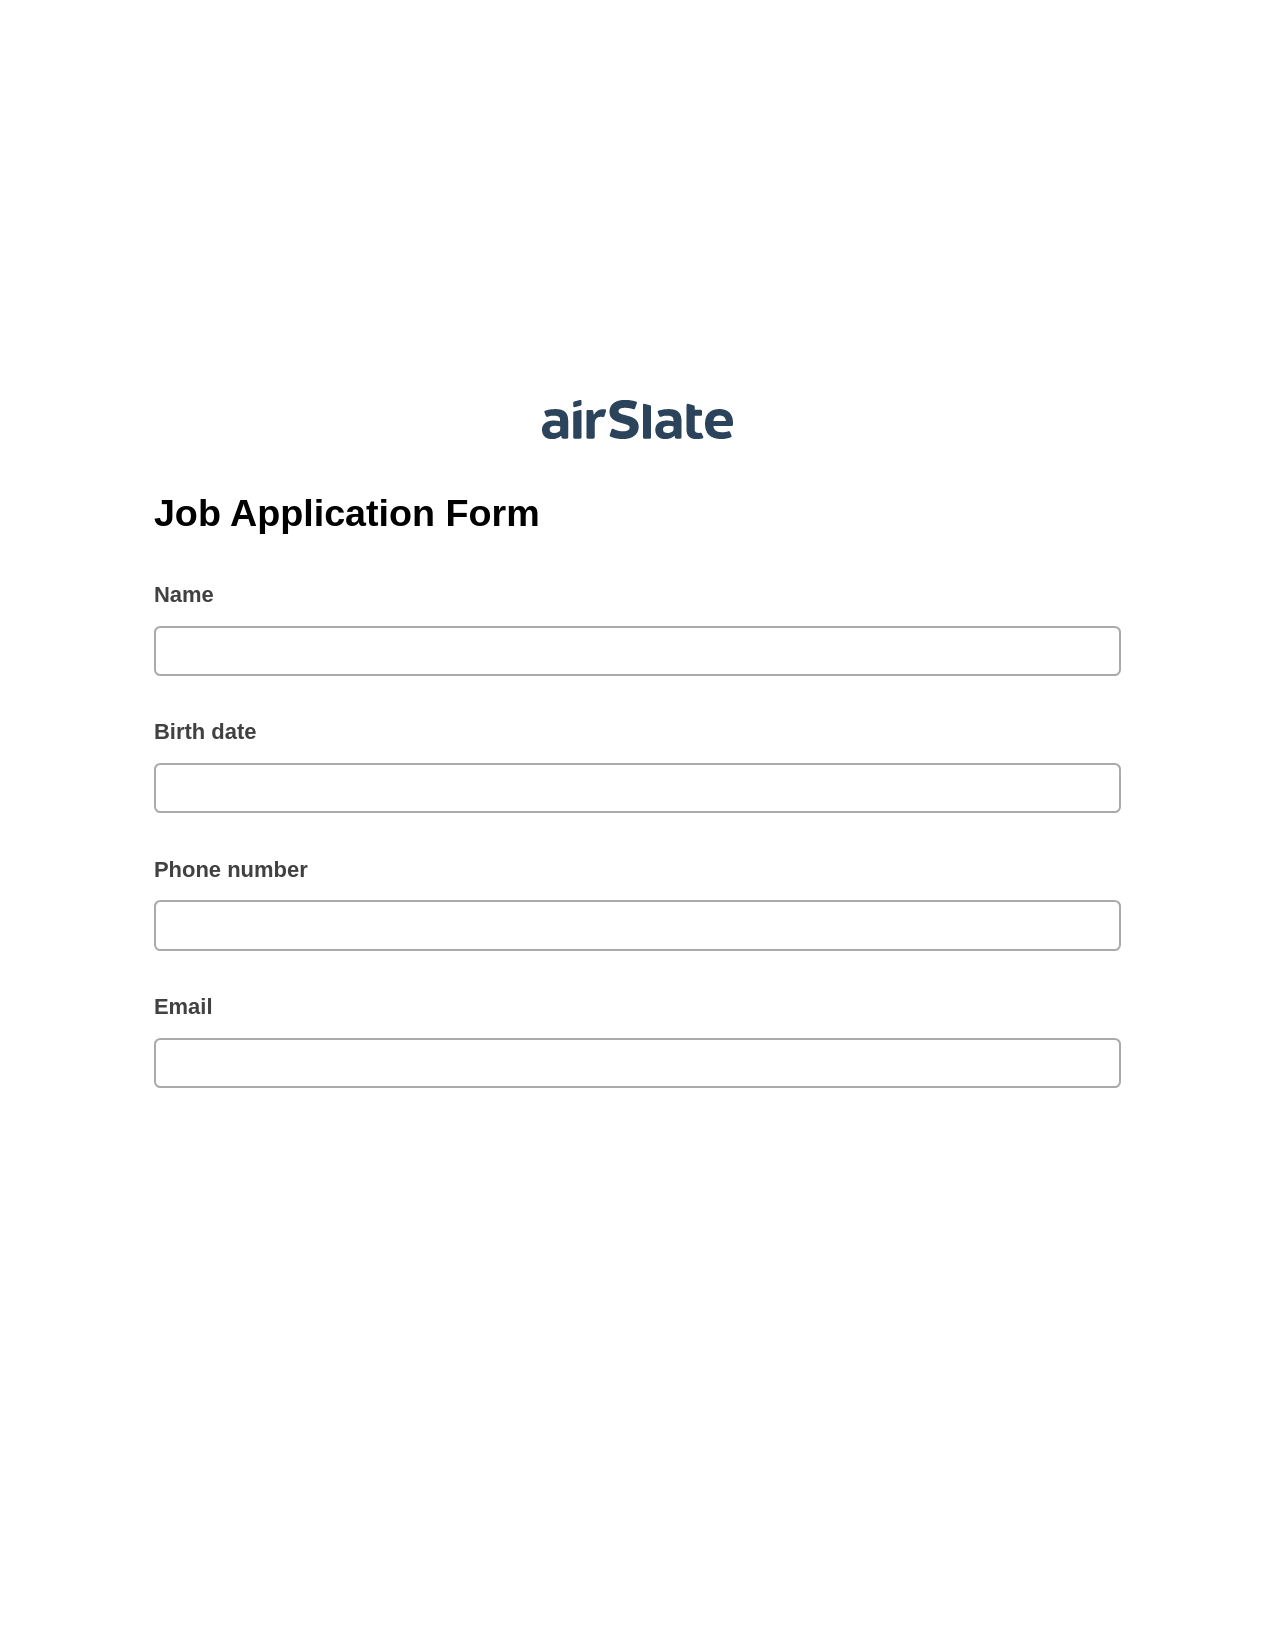 Multirole Job Application Form Pre-fill from another Slate Bot, Pre-fill with Custom Data Bot, Post-finish Document Bot